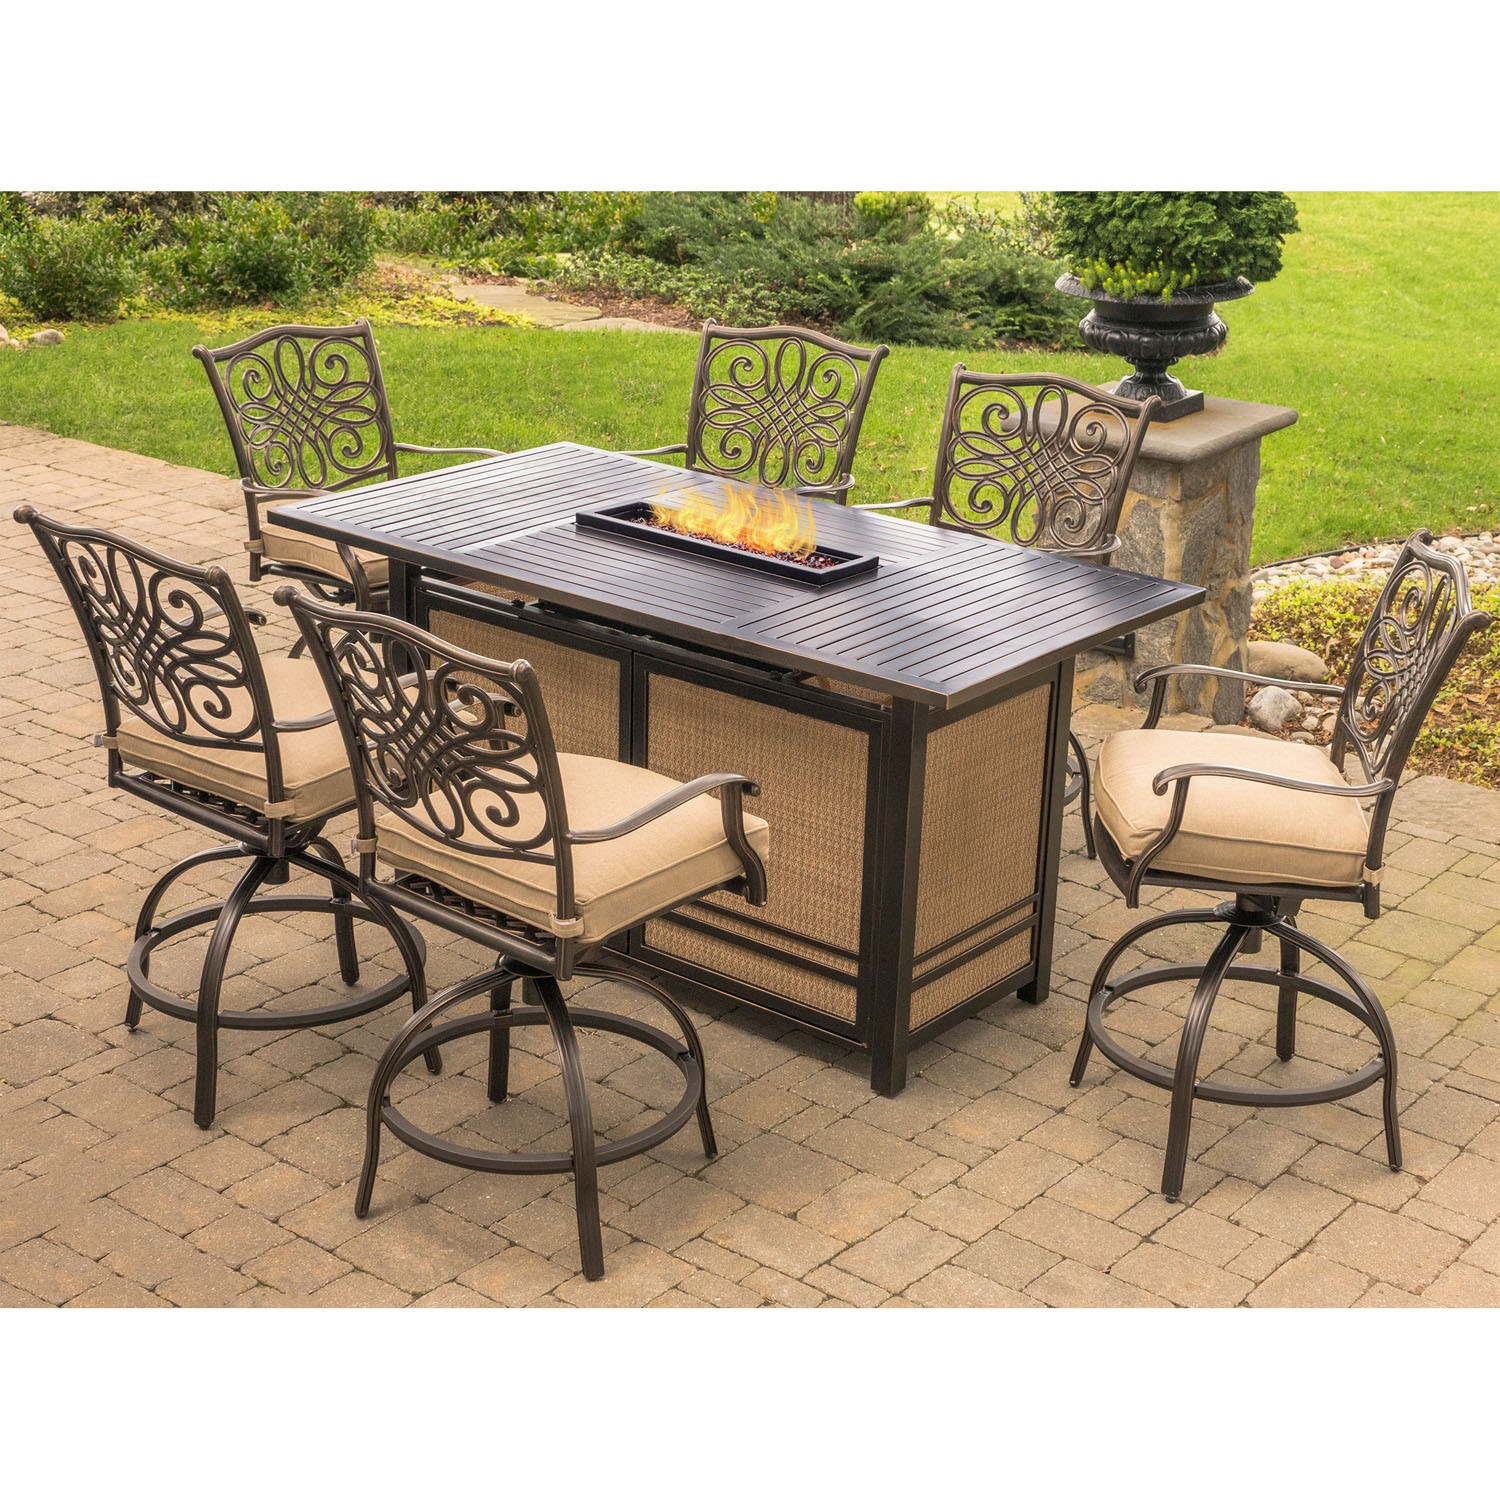 Fire Pit Dining Table Set
 Hanover Traditions 7 Piece High Dining Set in Tan with